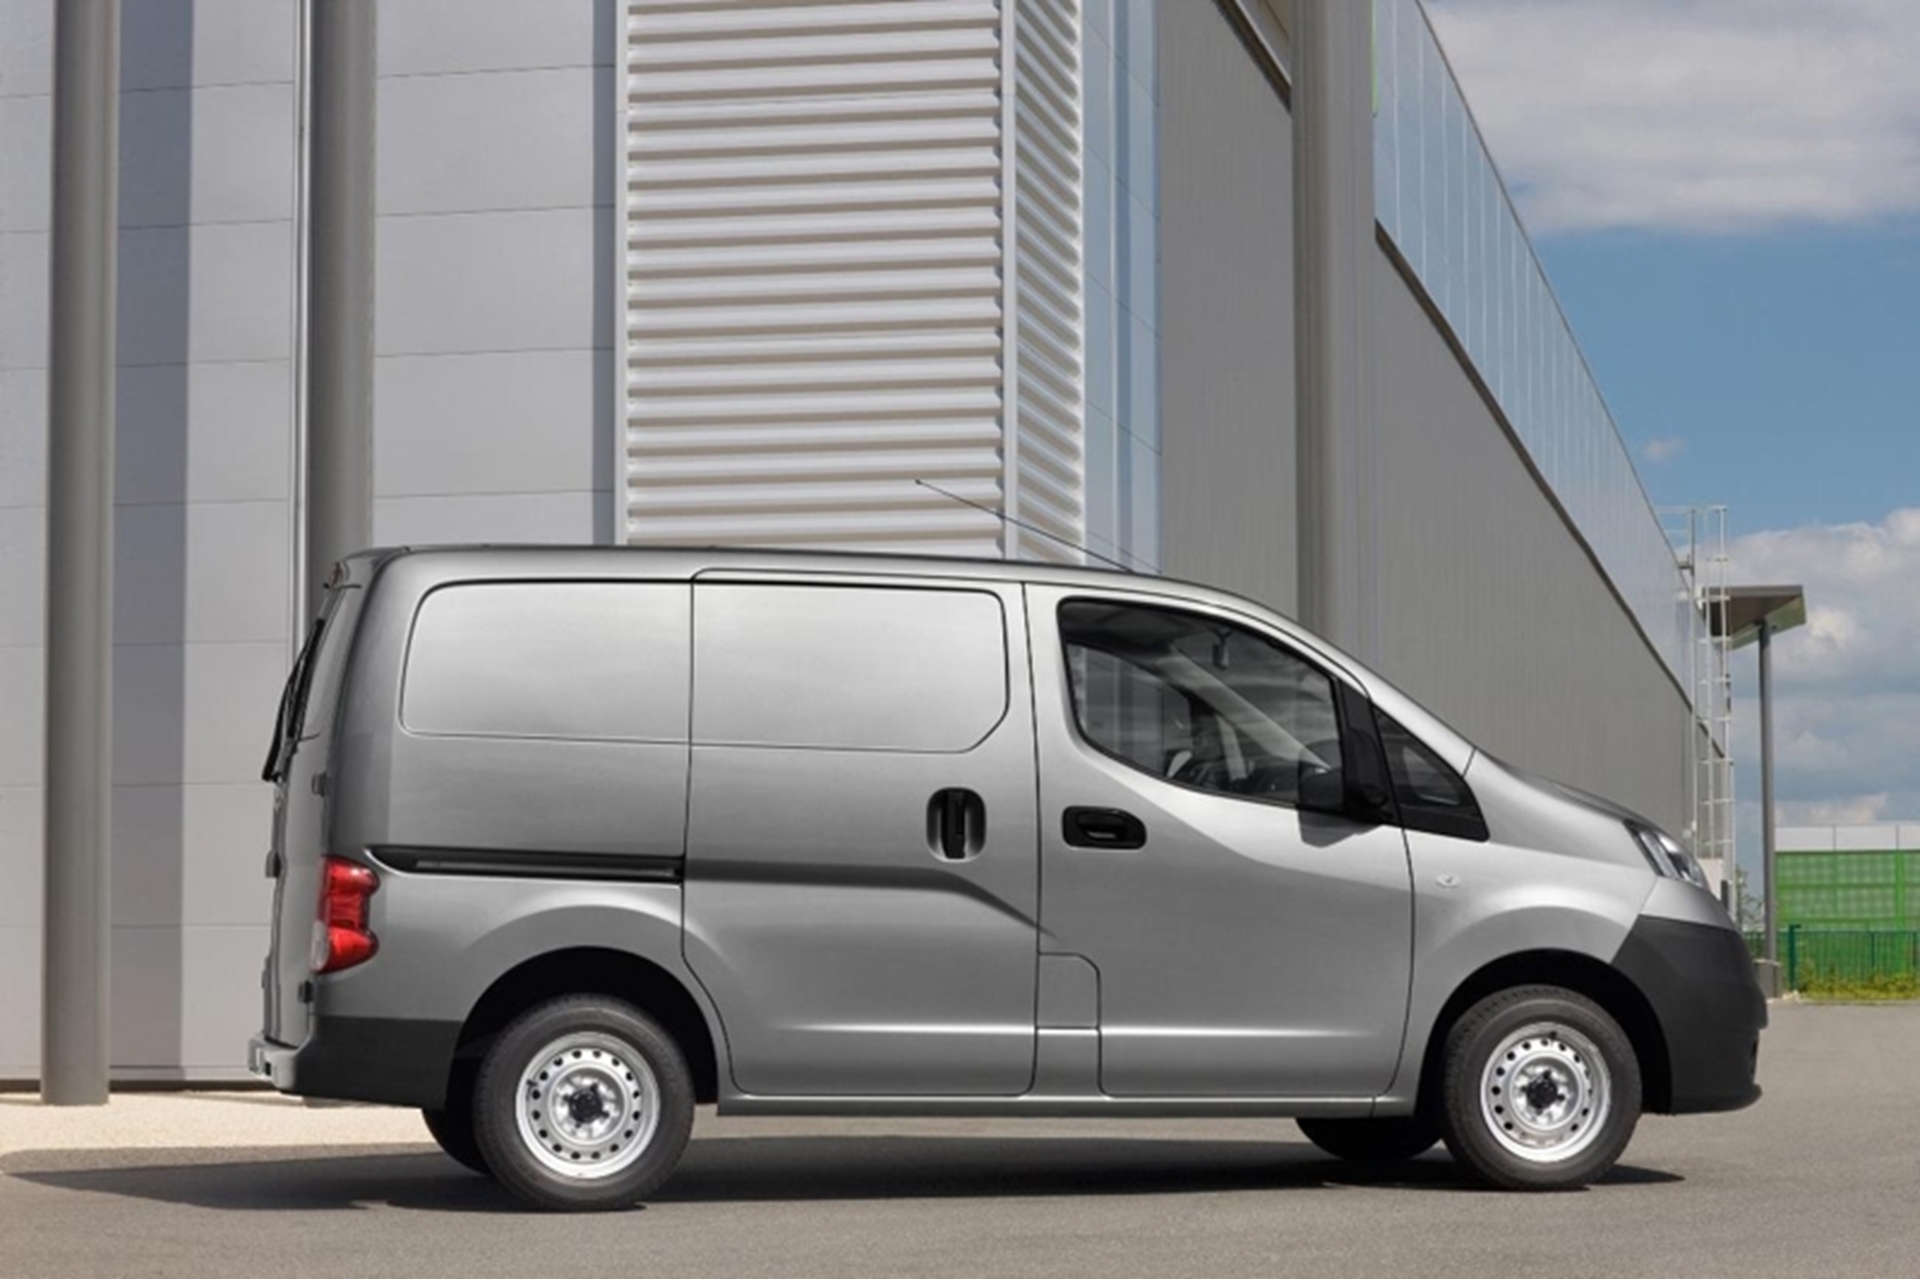 NISSAN’S 2011 LCV SALES PERFORMANCE BLOWS THE DOORS OFF 2010